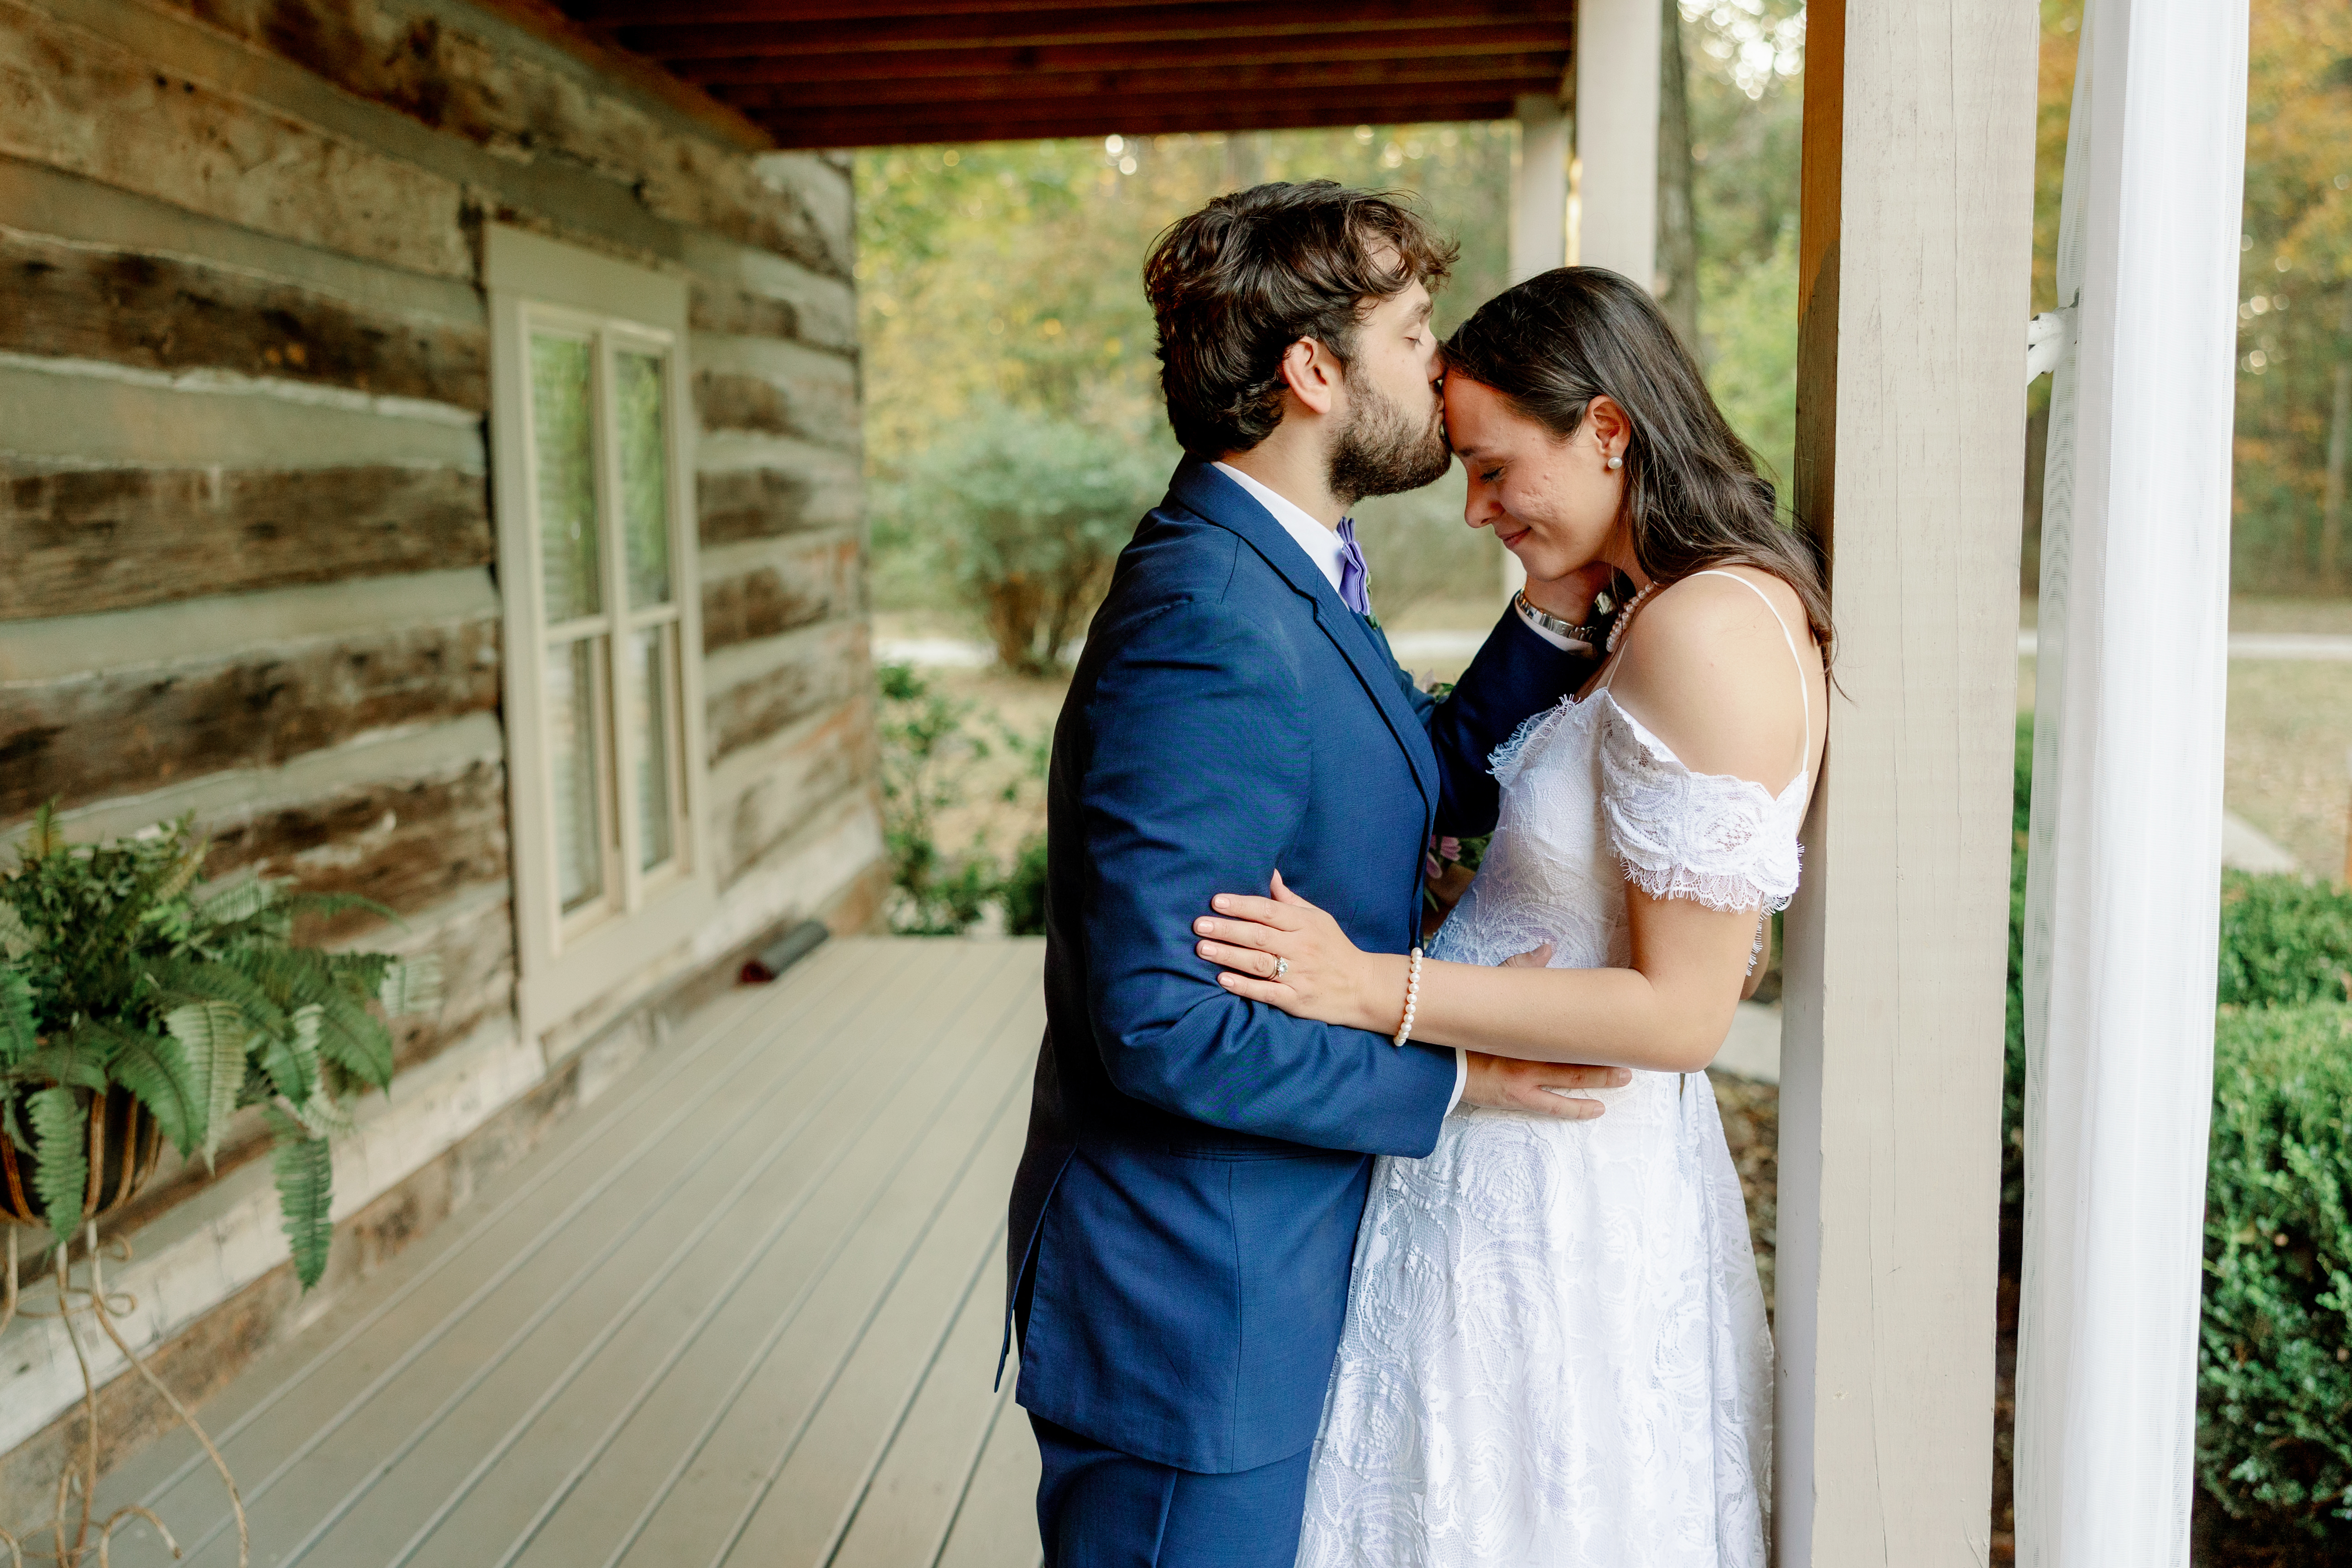 This Couple held a Tennessee Fall Wedding at a Historic Log Home Venue